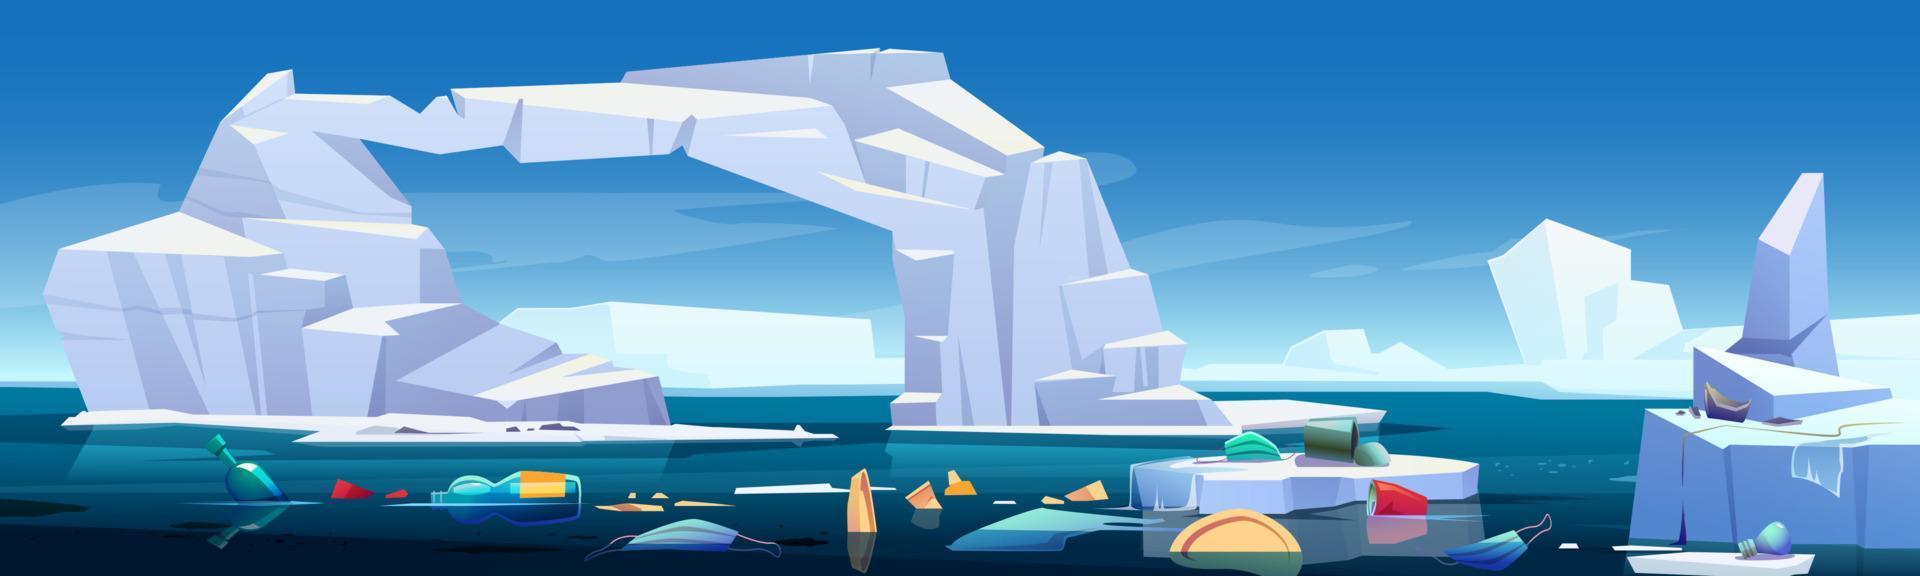 Arctic sea with melting iceberg and plastic trash vector